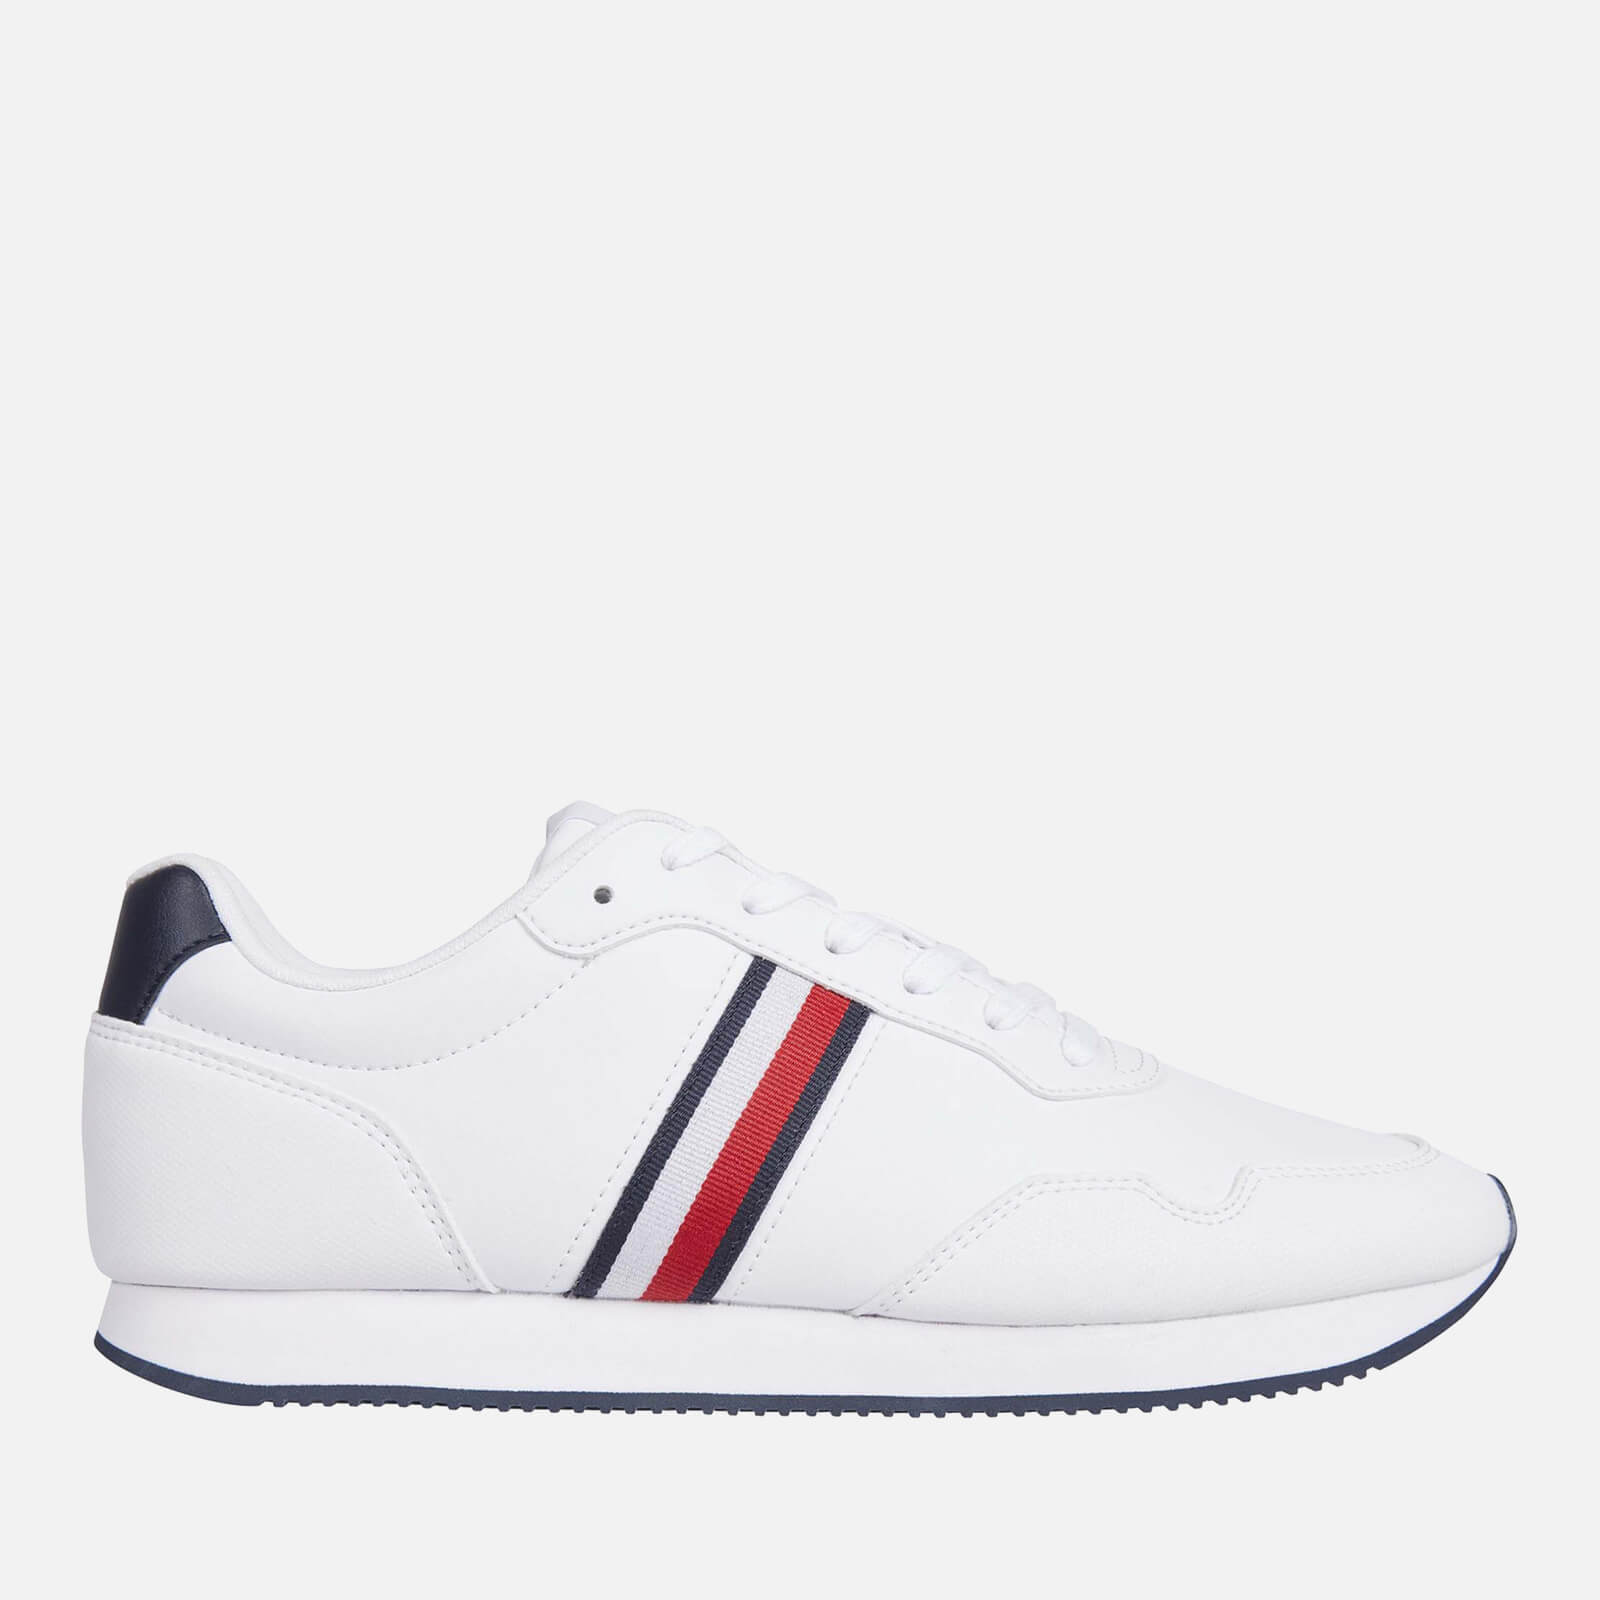 Tommy Hilfiger Men’s Leather Running Style Trainers